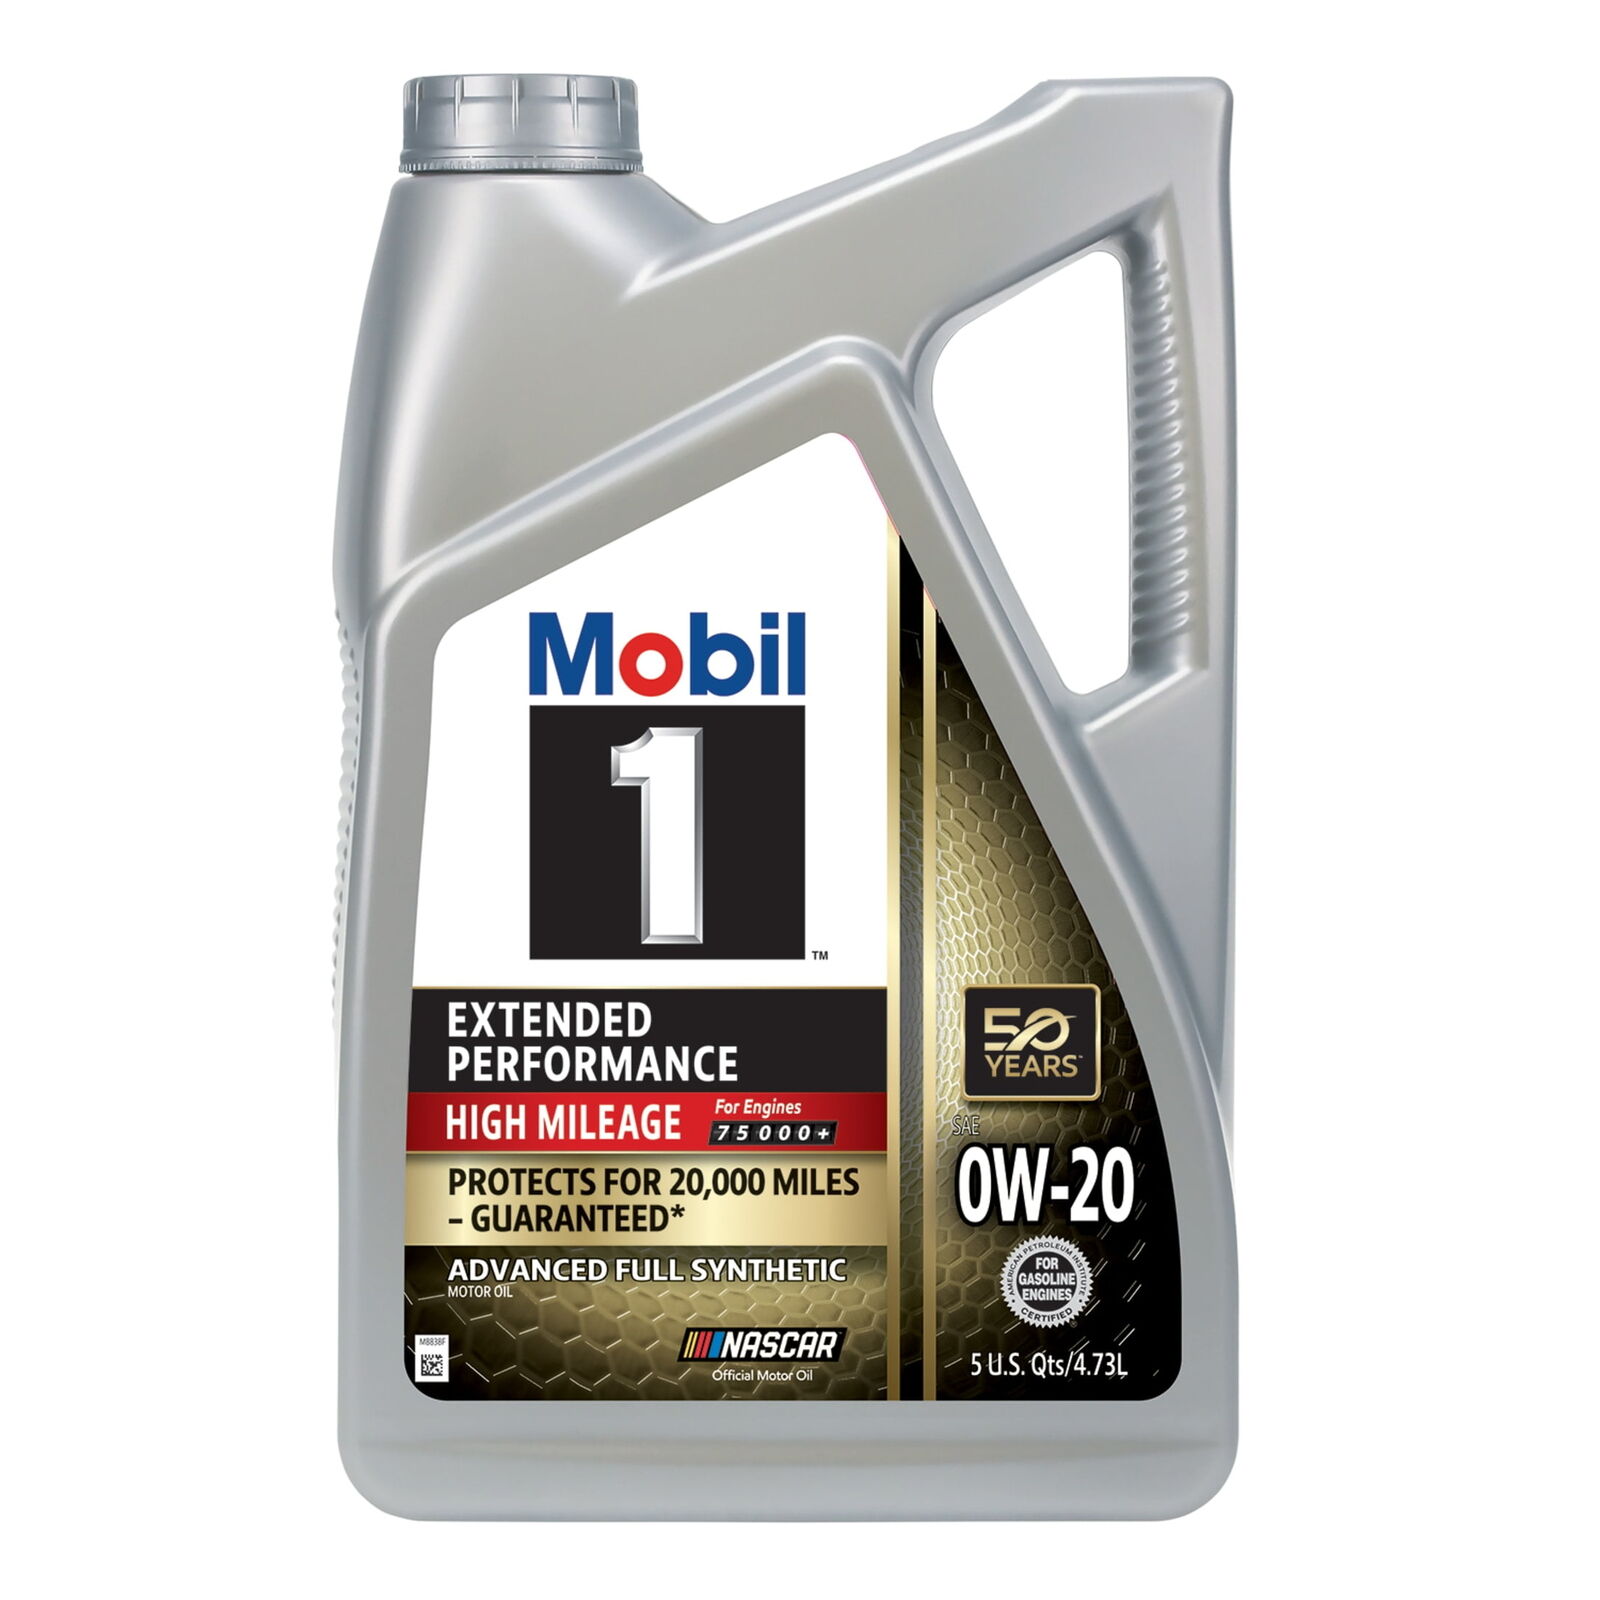 Extended Performance High Mileage Full Synthetic Motor Oil 0W-20, 5 Quart